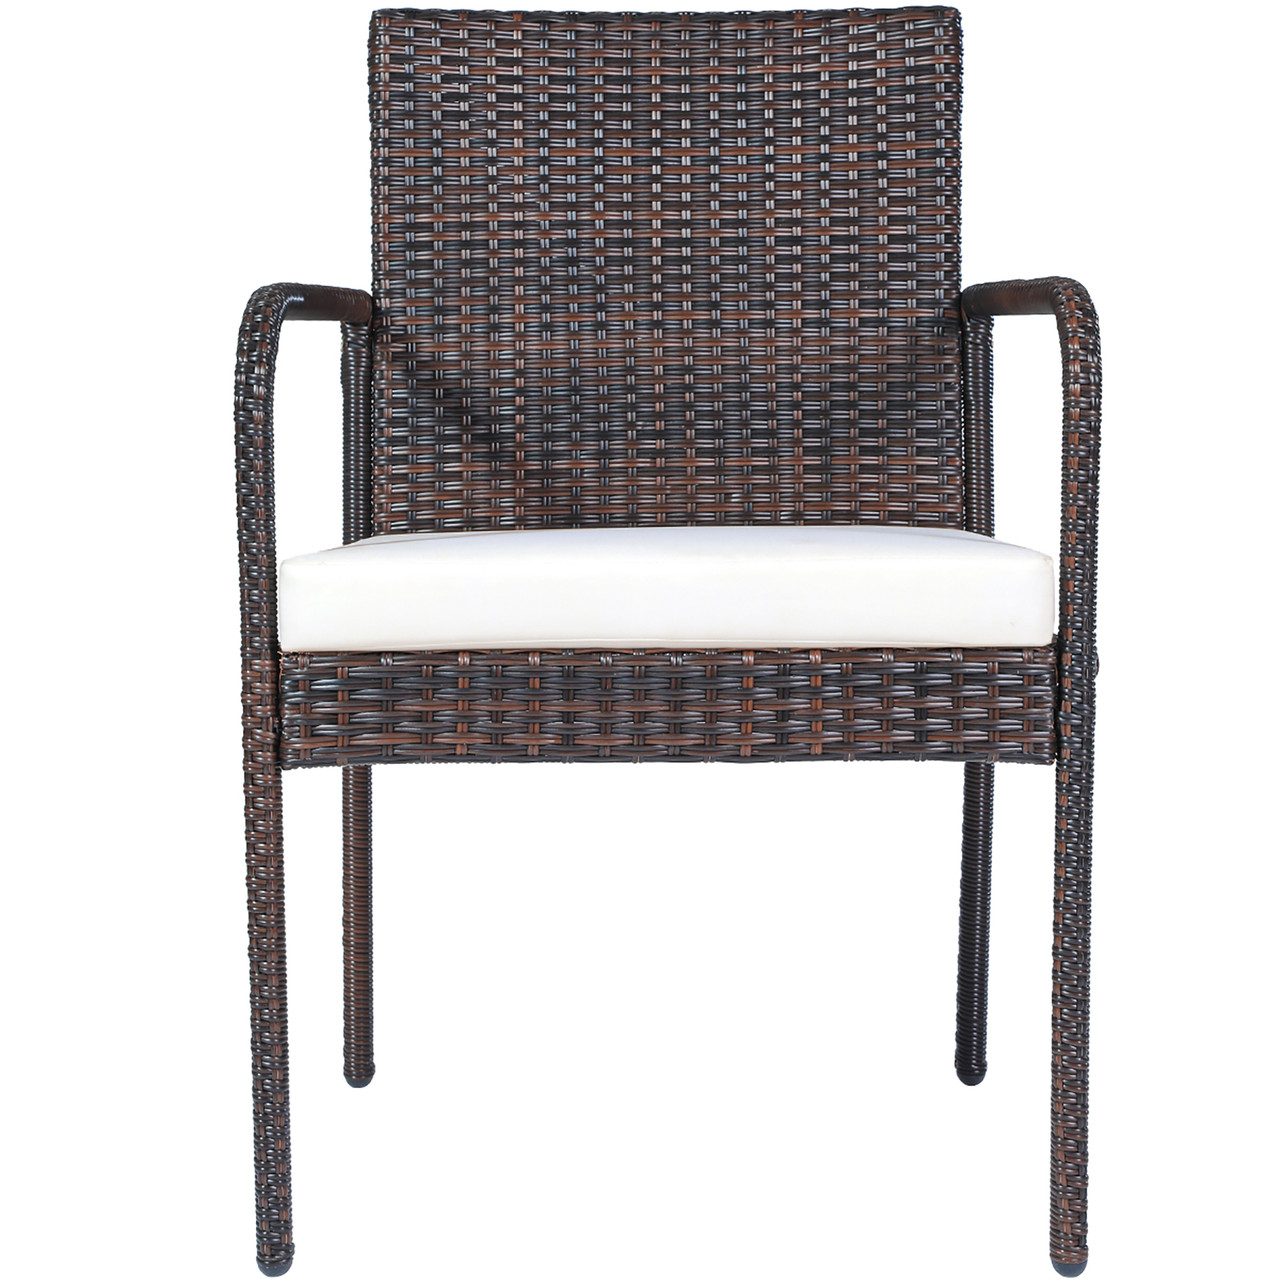 Goplus® Cushioned Outdoor Patio Rattan Dining Chairs (Set of 4) product image